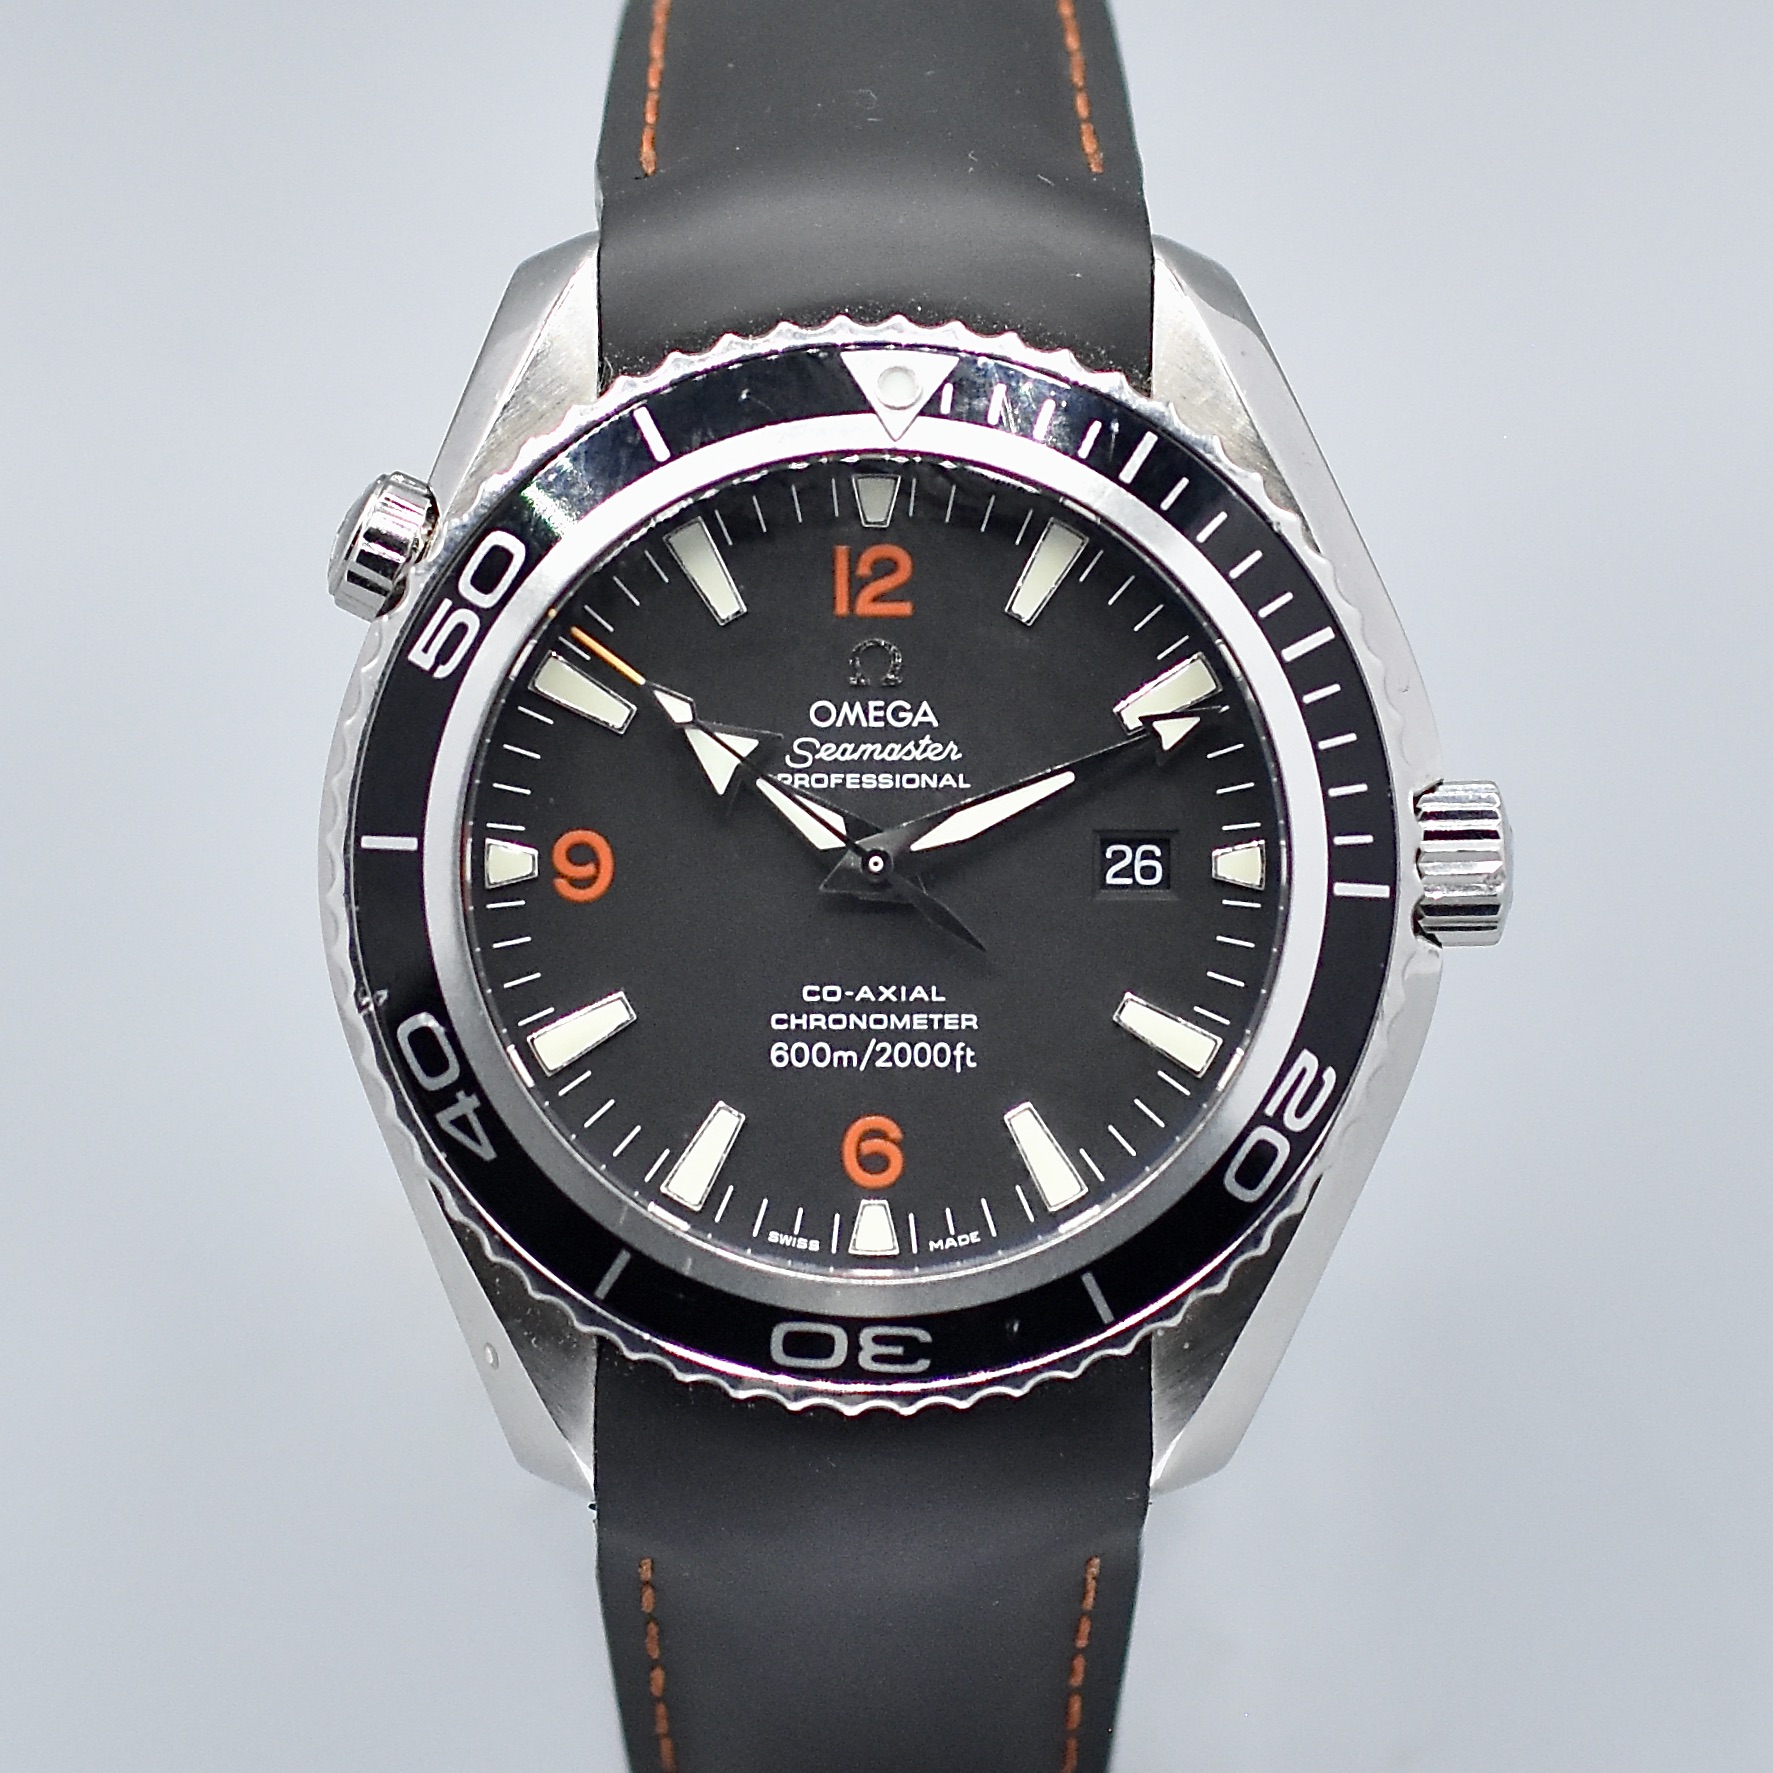 OMEGA SEAMASTER PLANET OCEAN REF. 29005182 BOX AND PAPERS